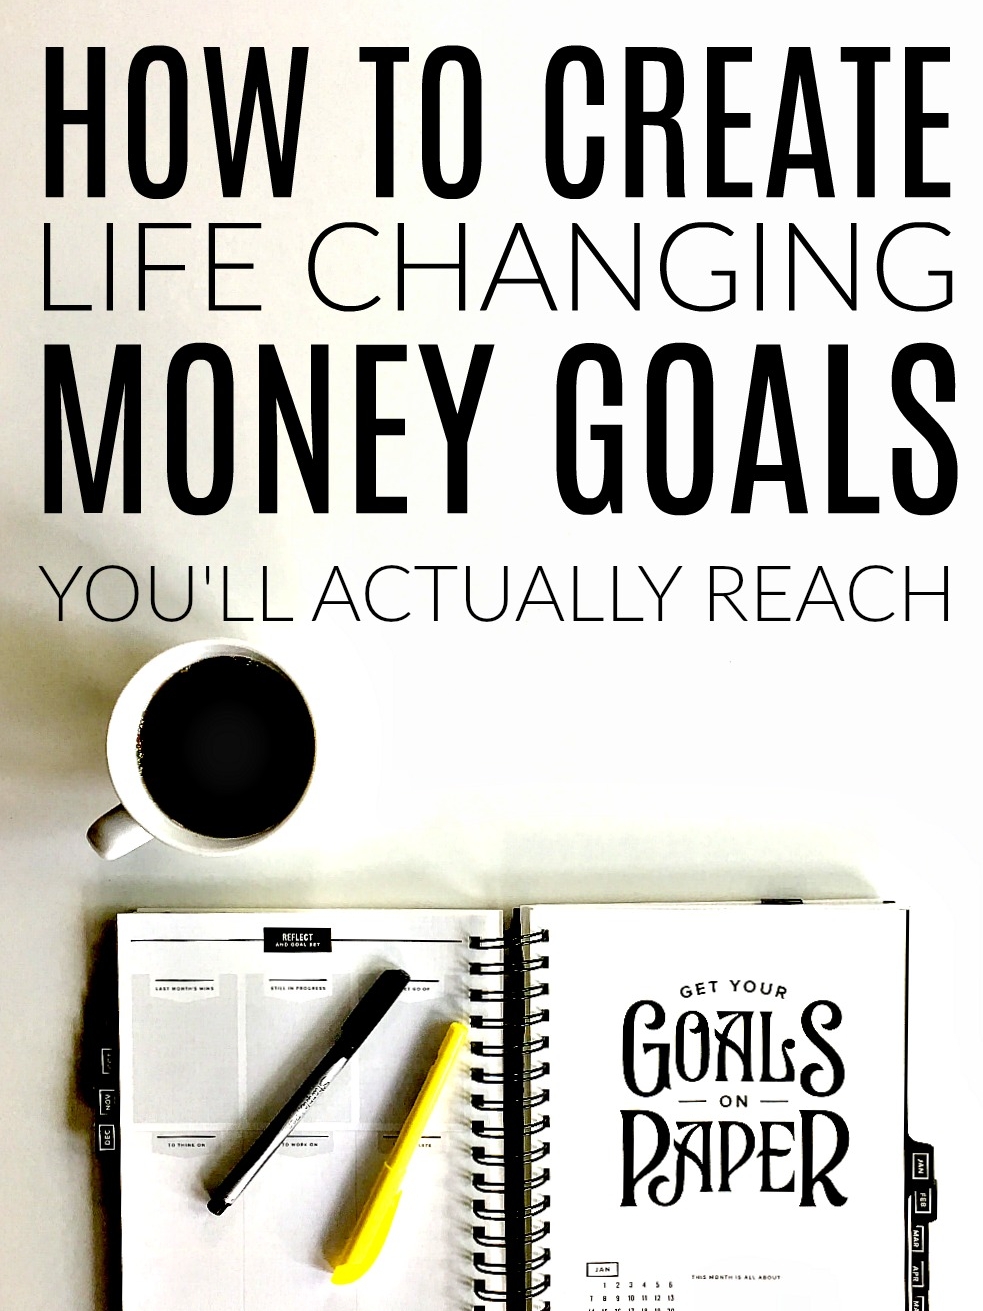 HOW TO SET FINANCIAL GOALS (you can actually reach!) — melissa voigt